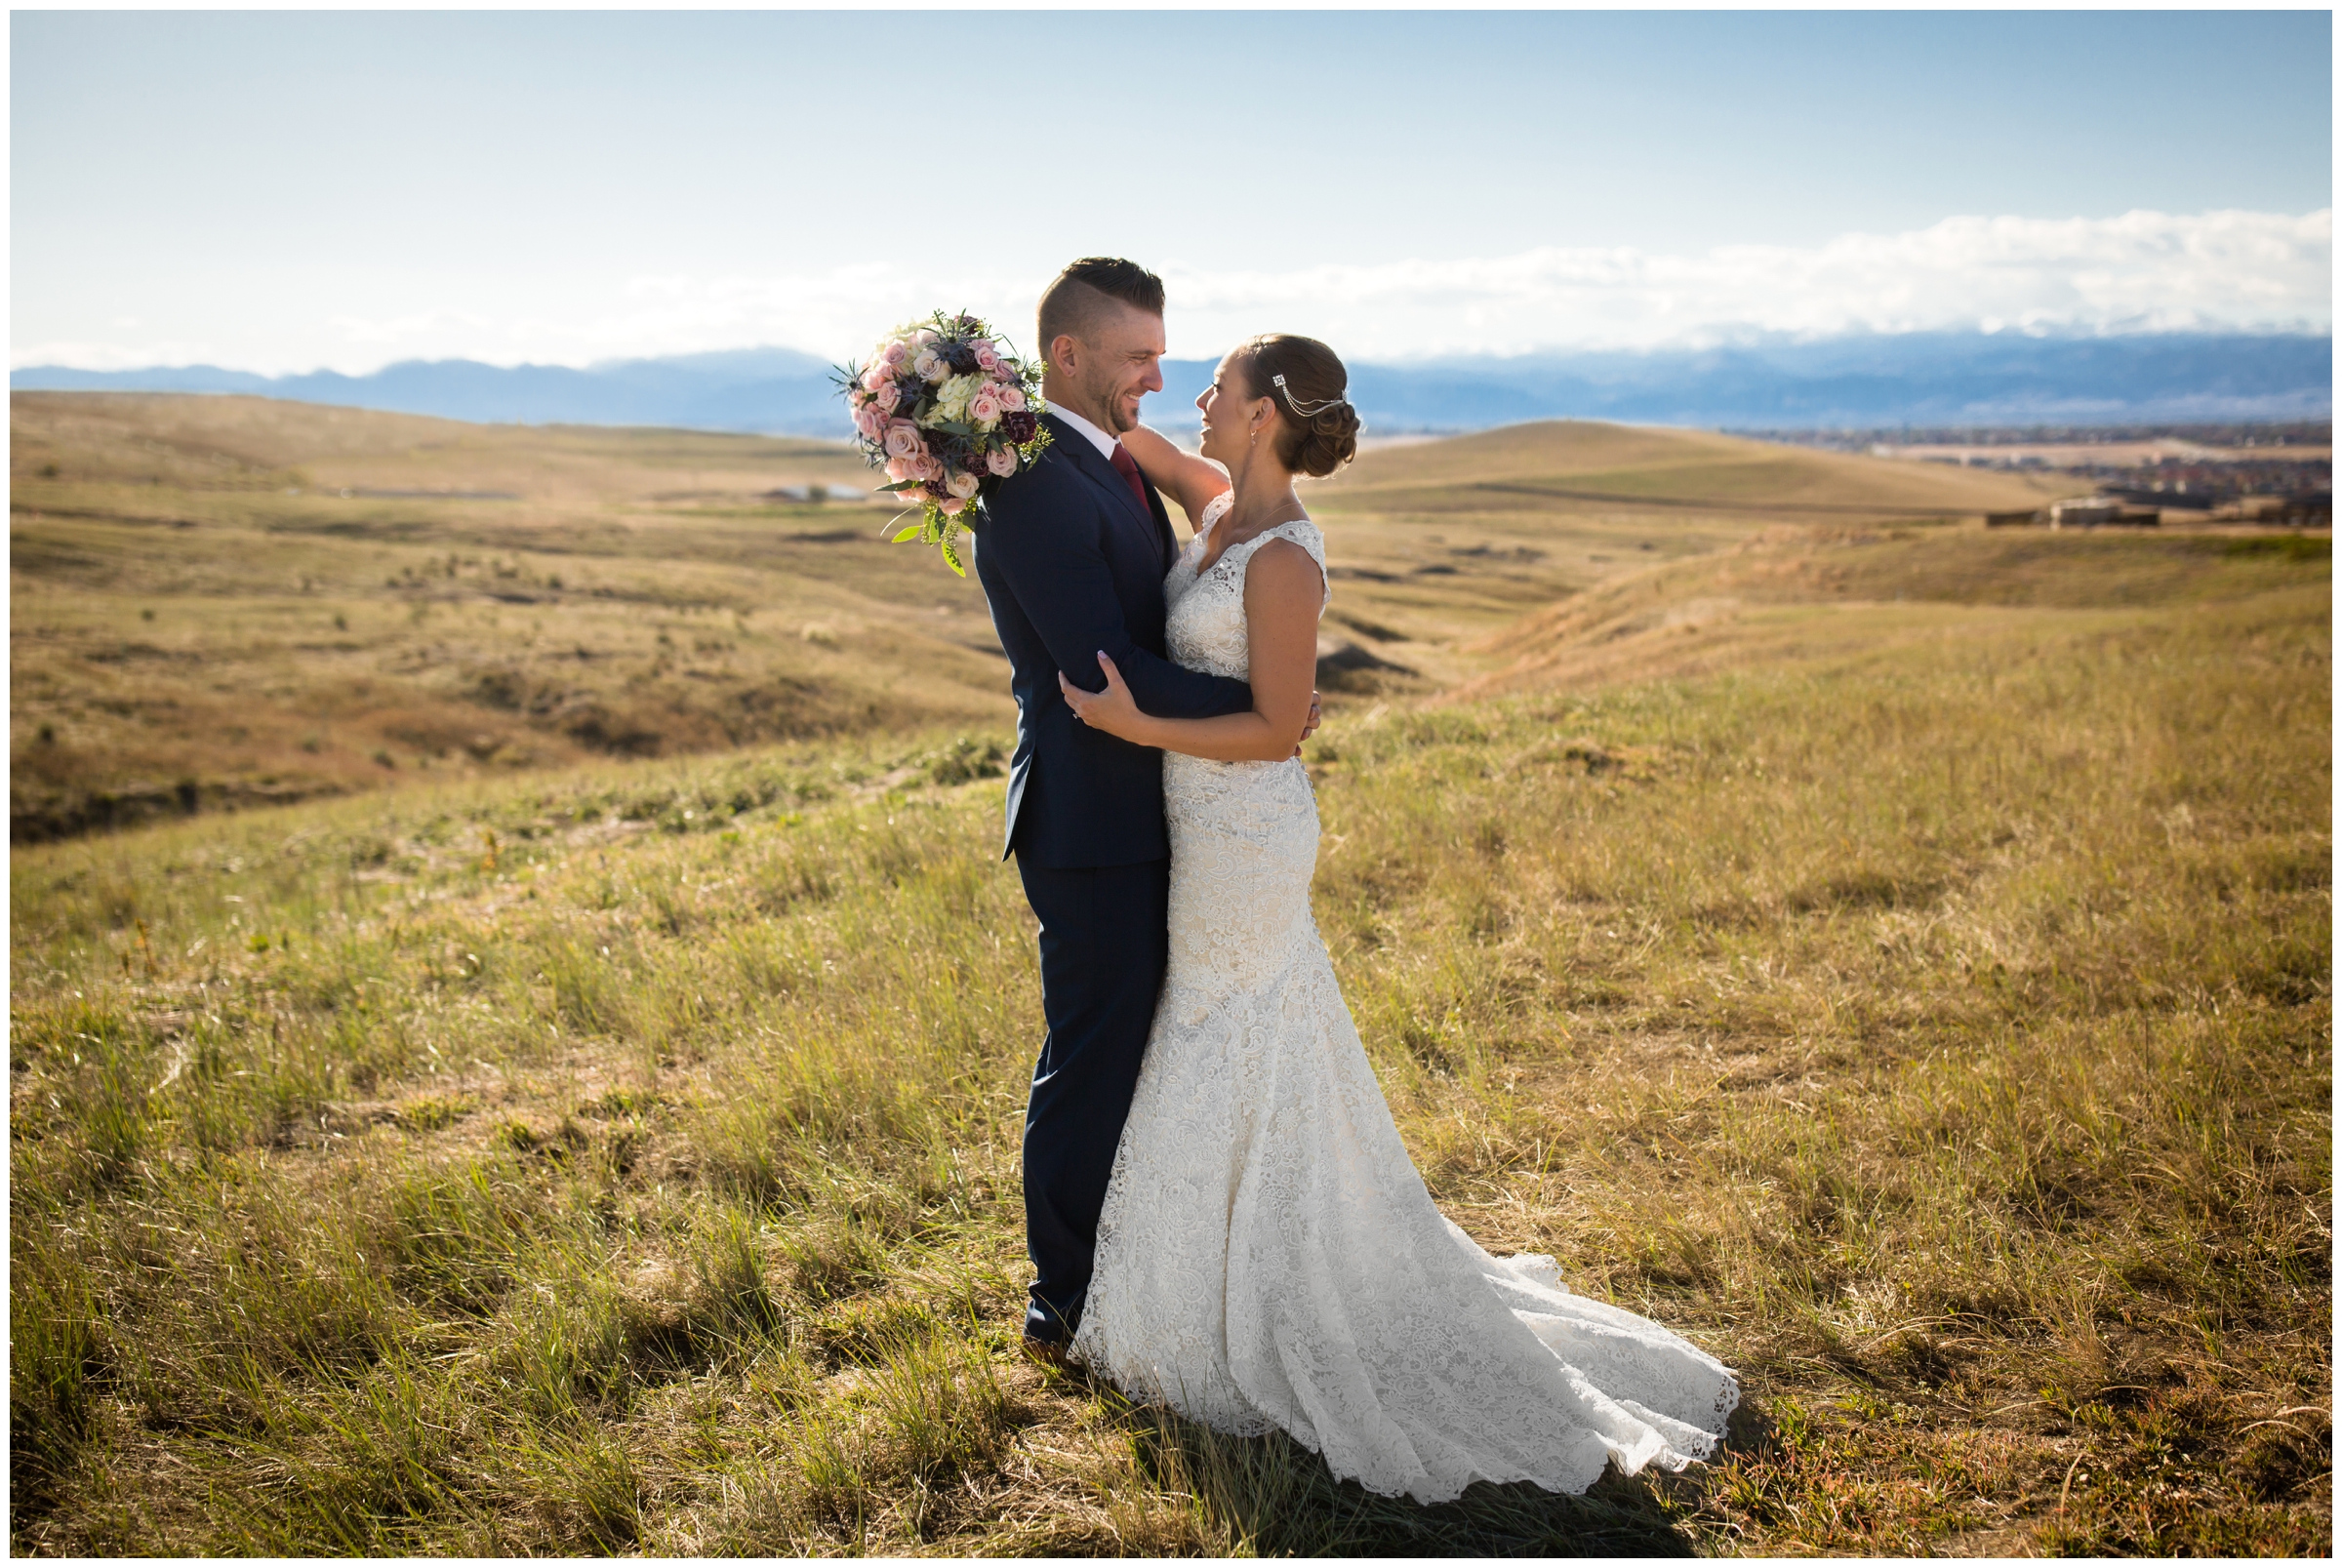 Erie Colorado wedding photos at Colliers Hill Amenity Center with mountains in background by photographer Plum Pretty Photography